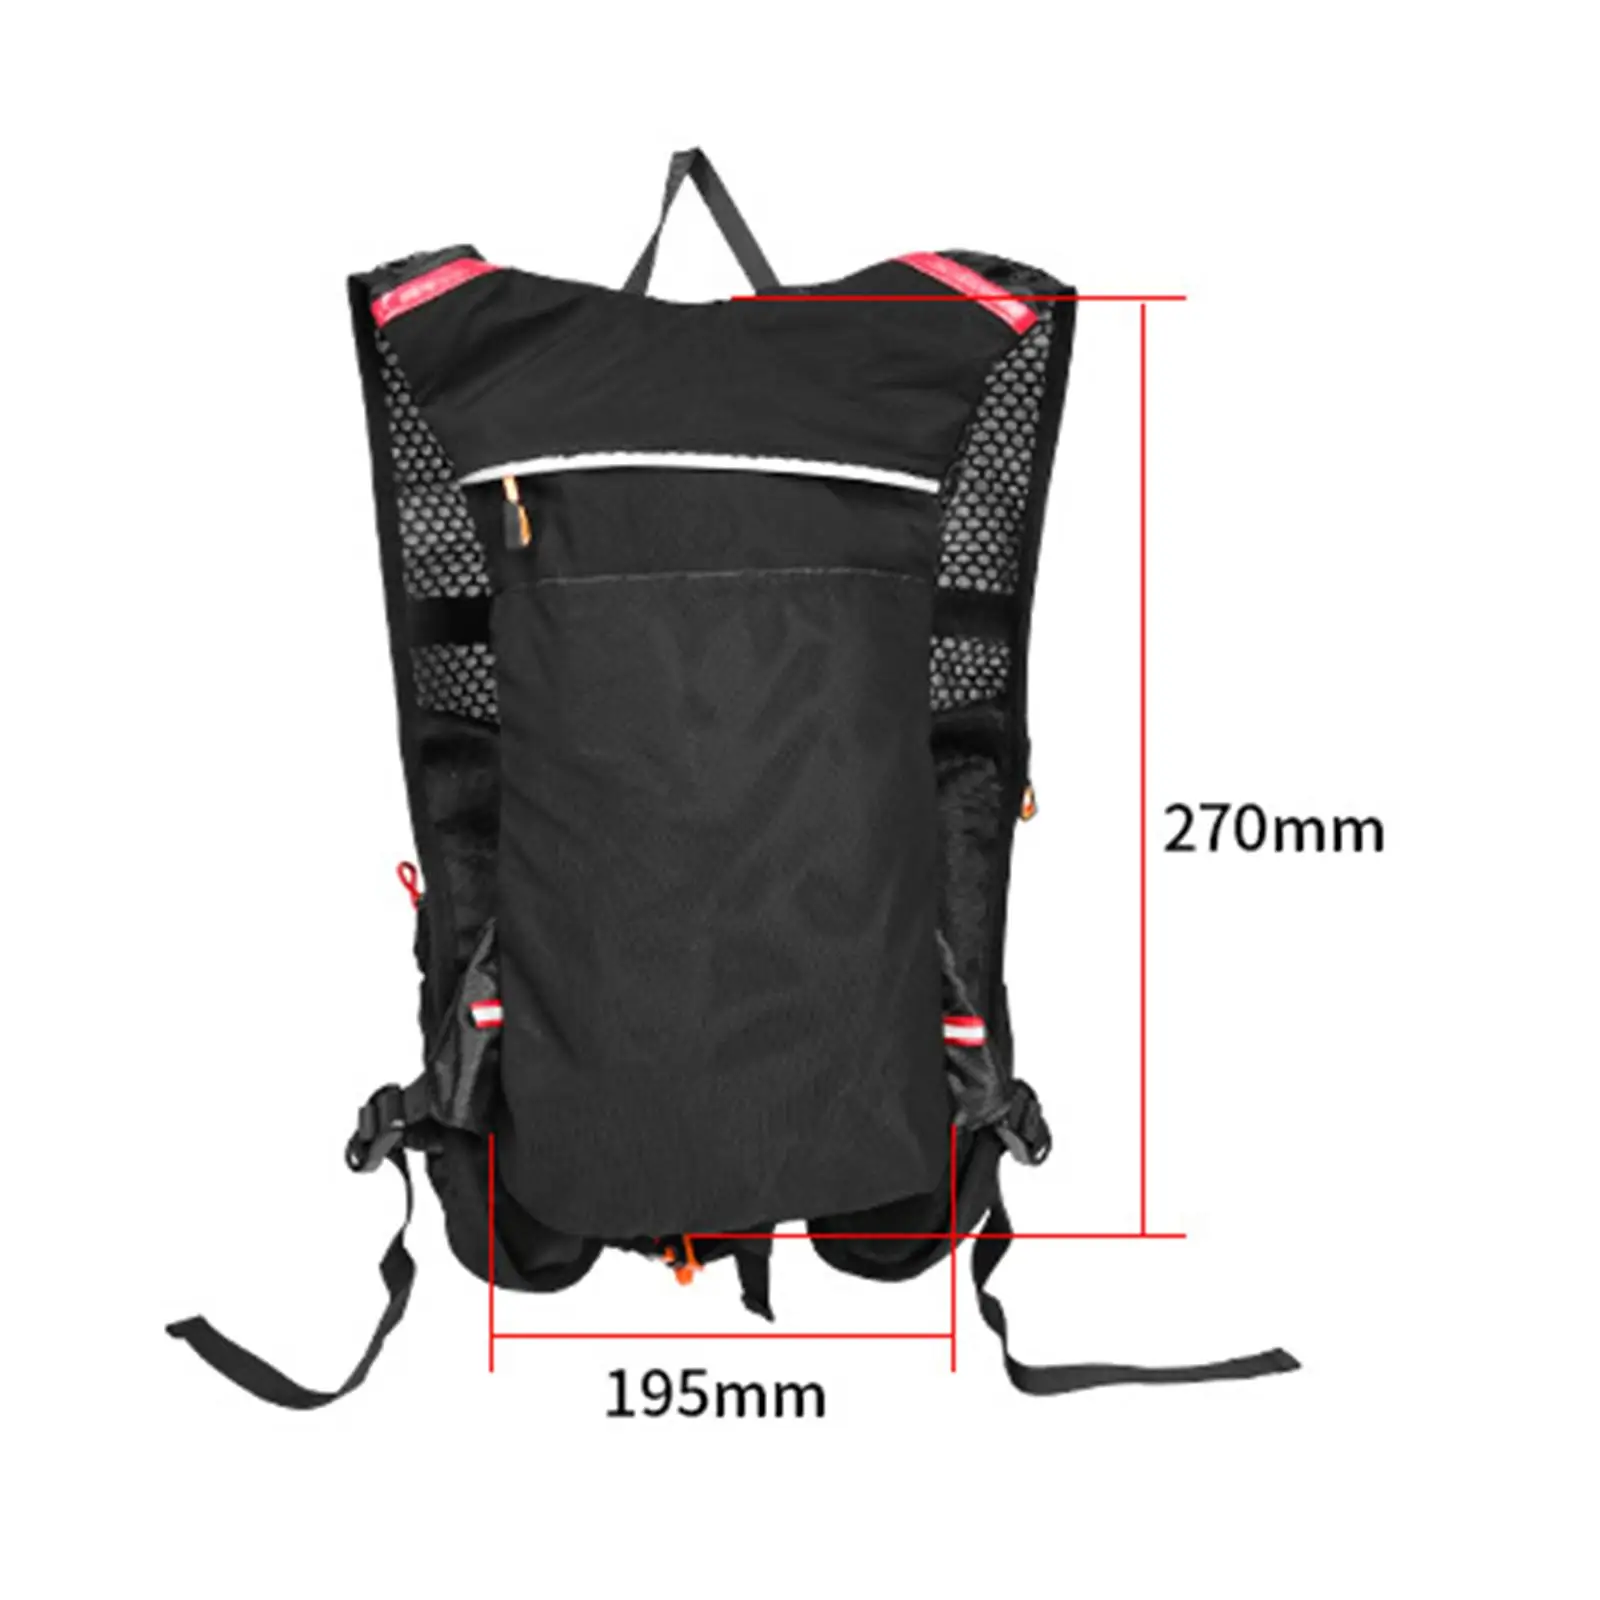 Hydration Backpack Knapsack Water Bag Compartment Daypack Rucksack for Mountaineering Backpacking Biking Climbing Travel